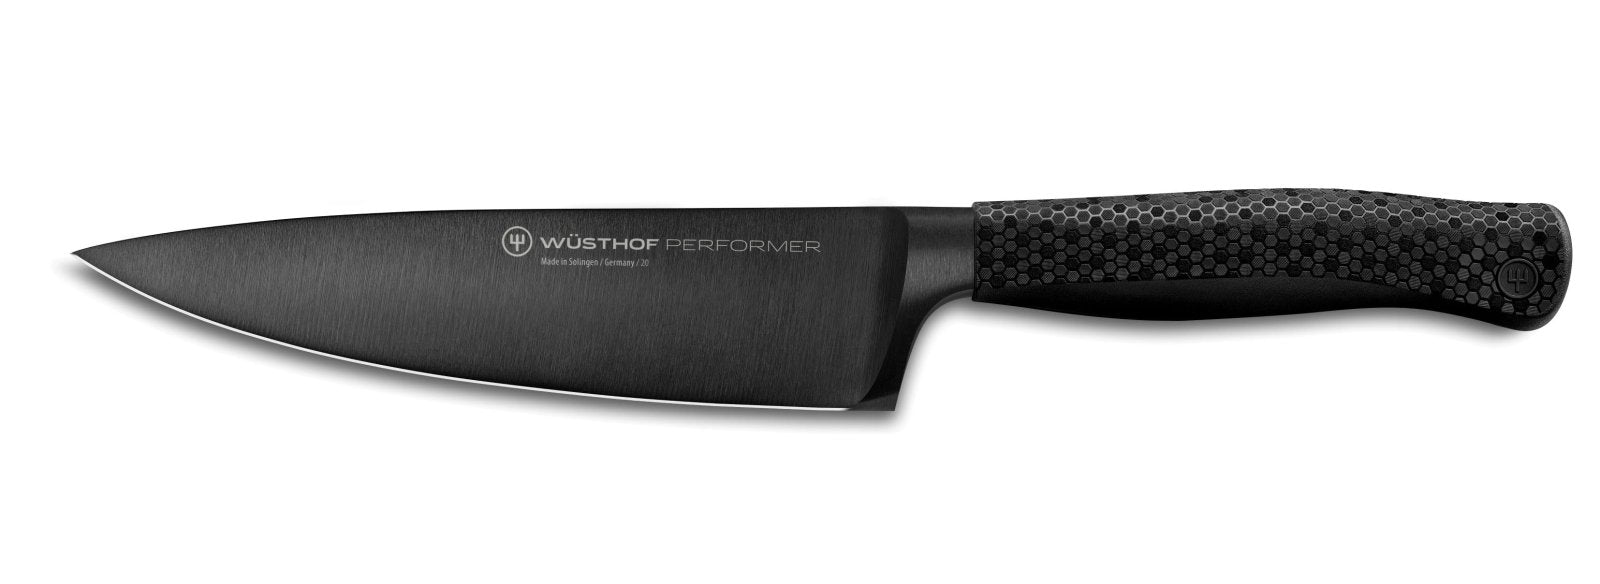 Wusthof Performer Cook's Knife 16cm - WT1061200116 - The Cotswold Knife Company